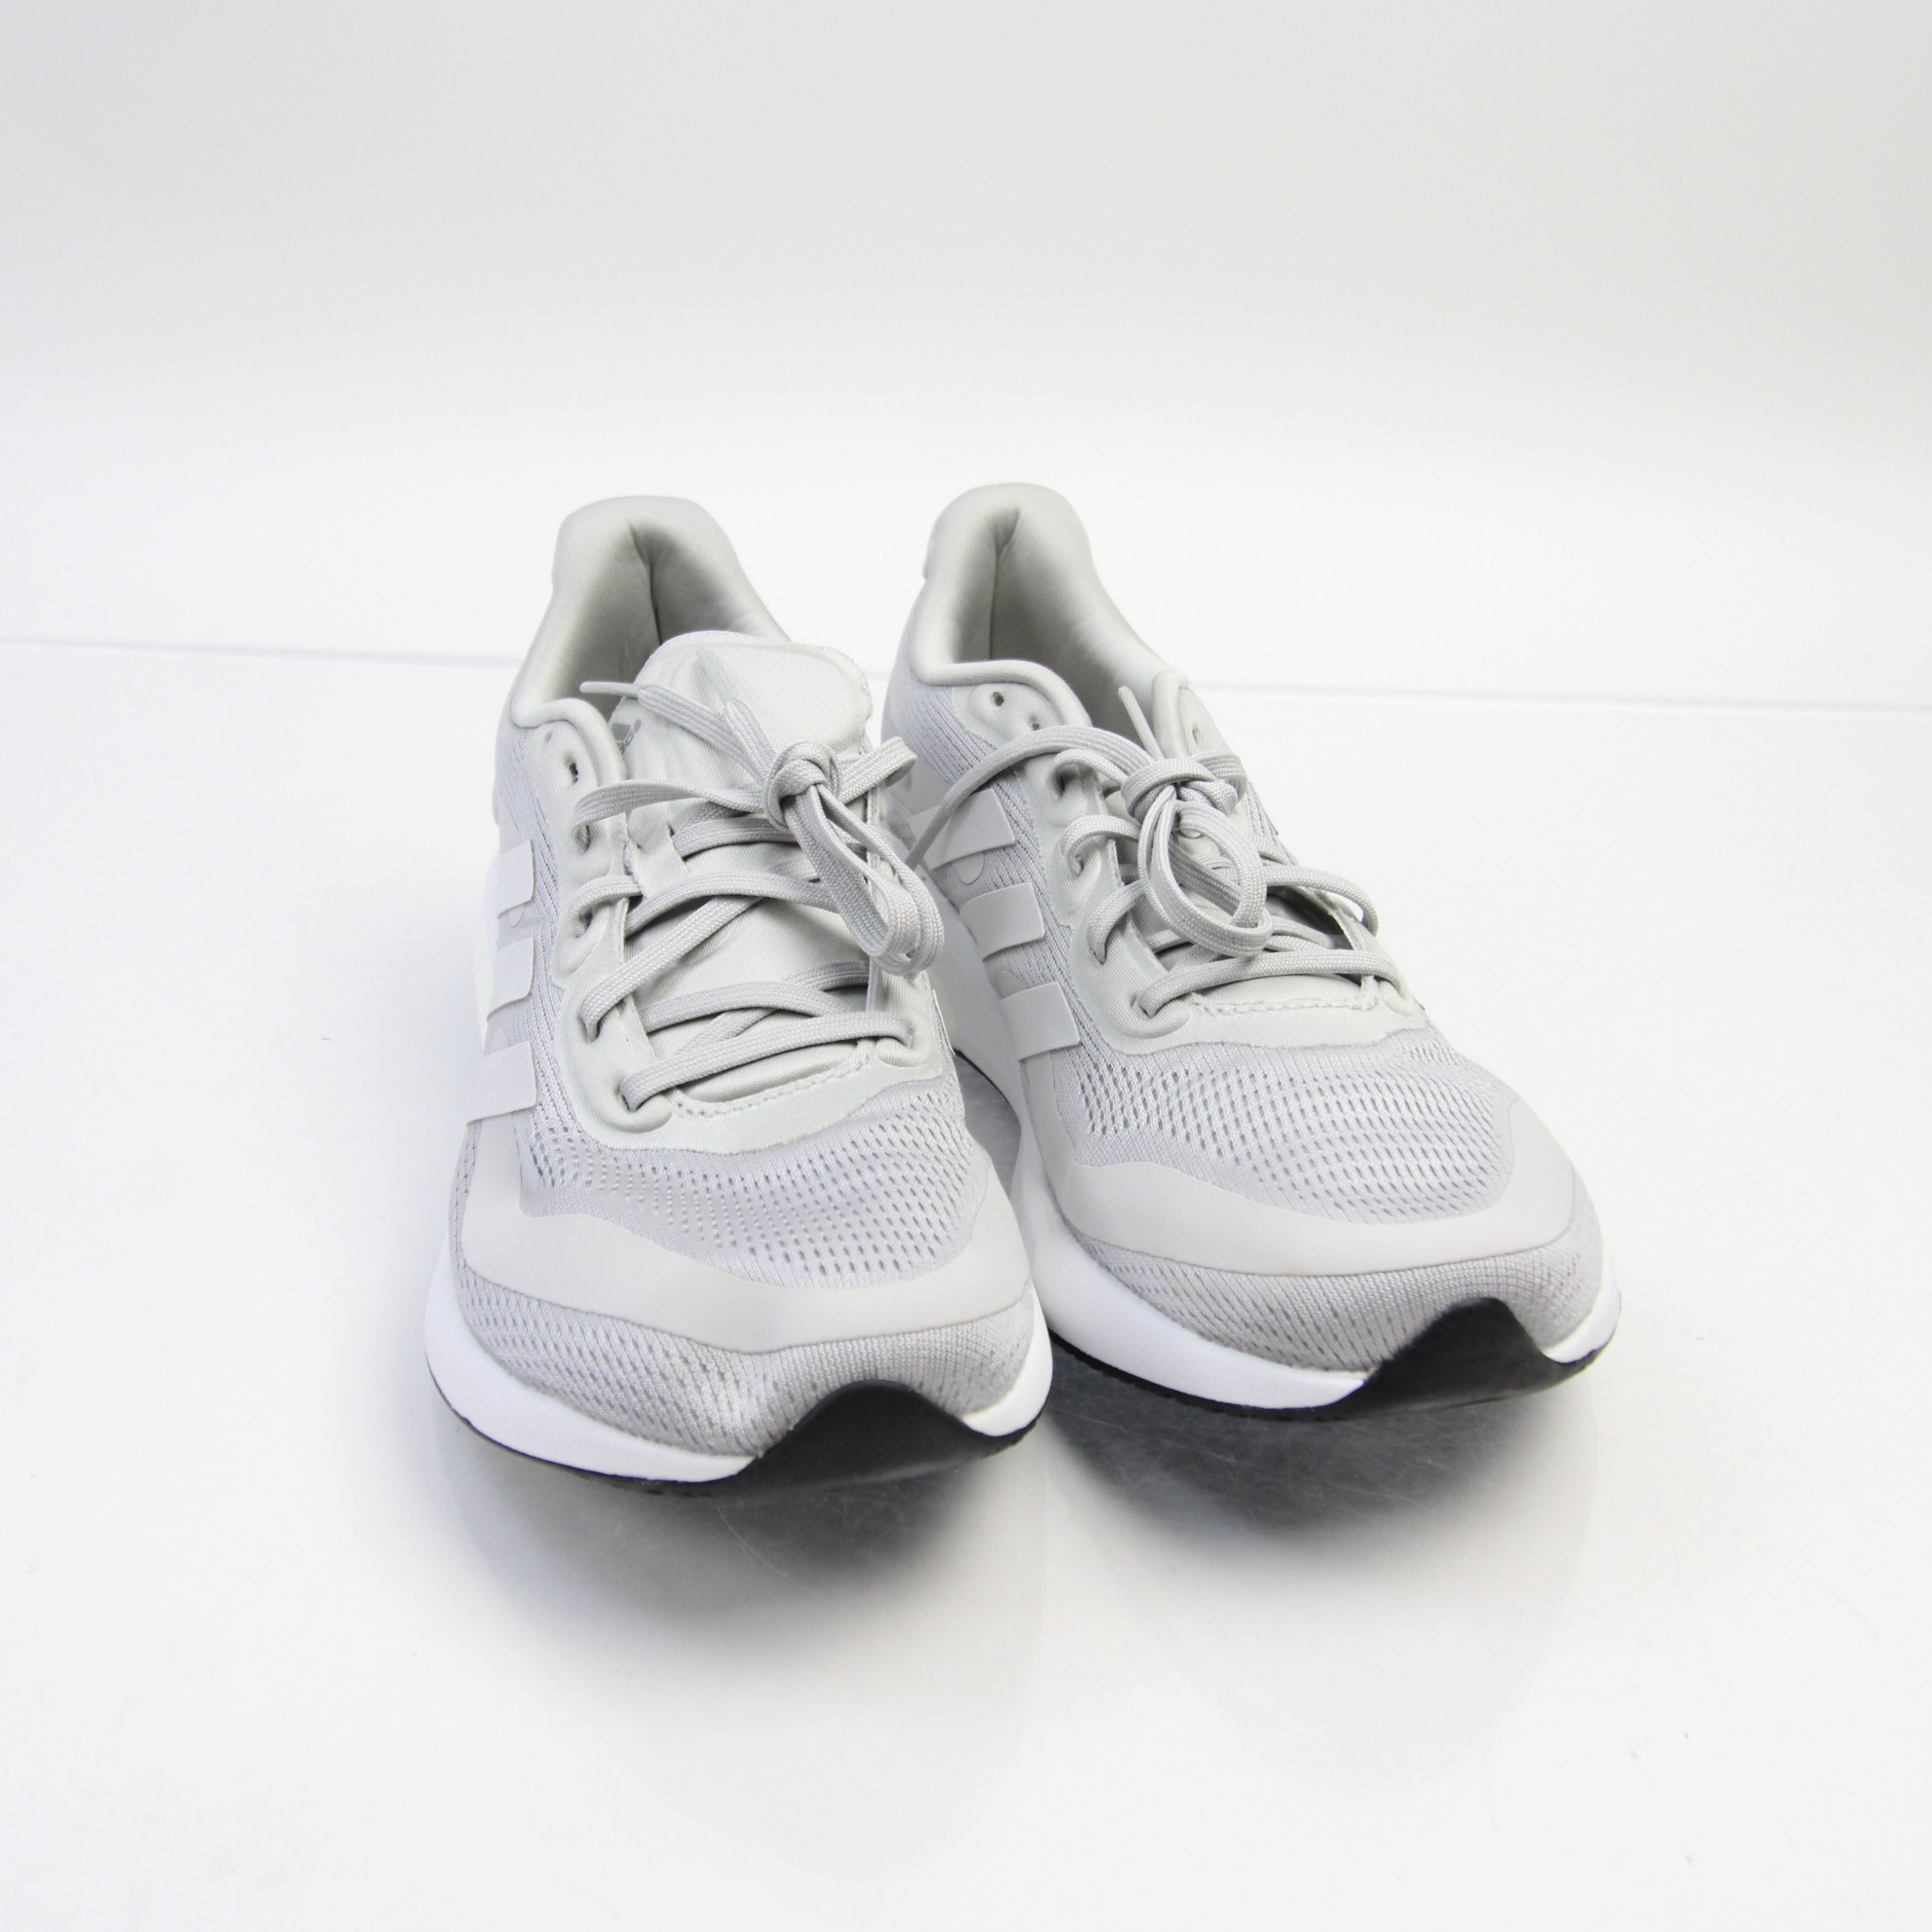 Charlotte Bronte temperament business adidas Primegreen Running Jogging Shoes Women's Gray/White New without Box  | eBay